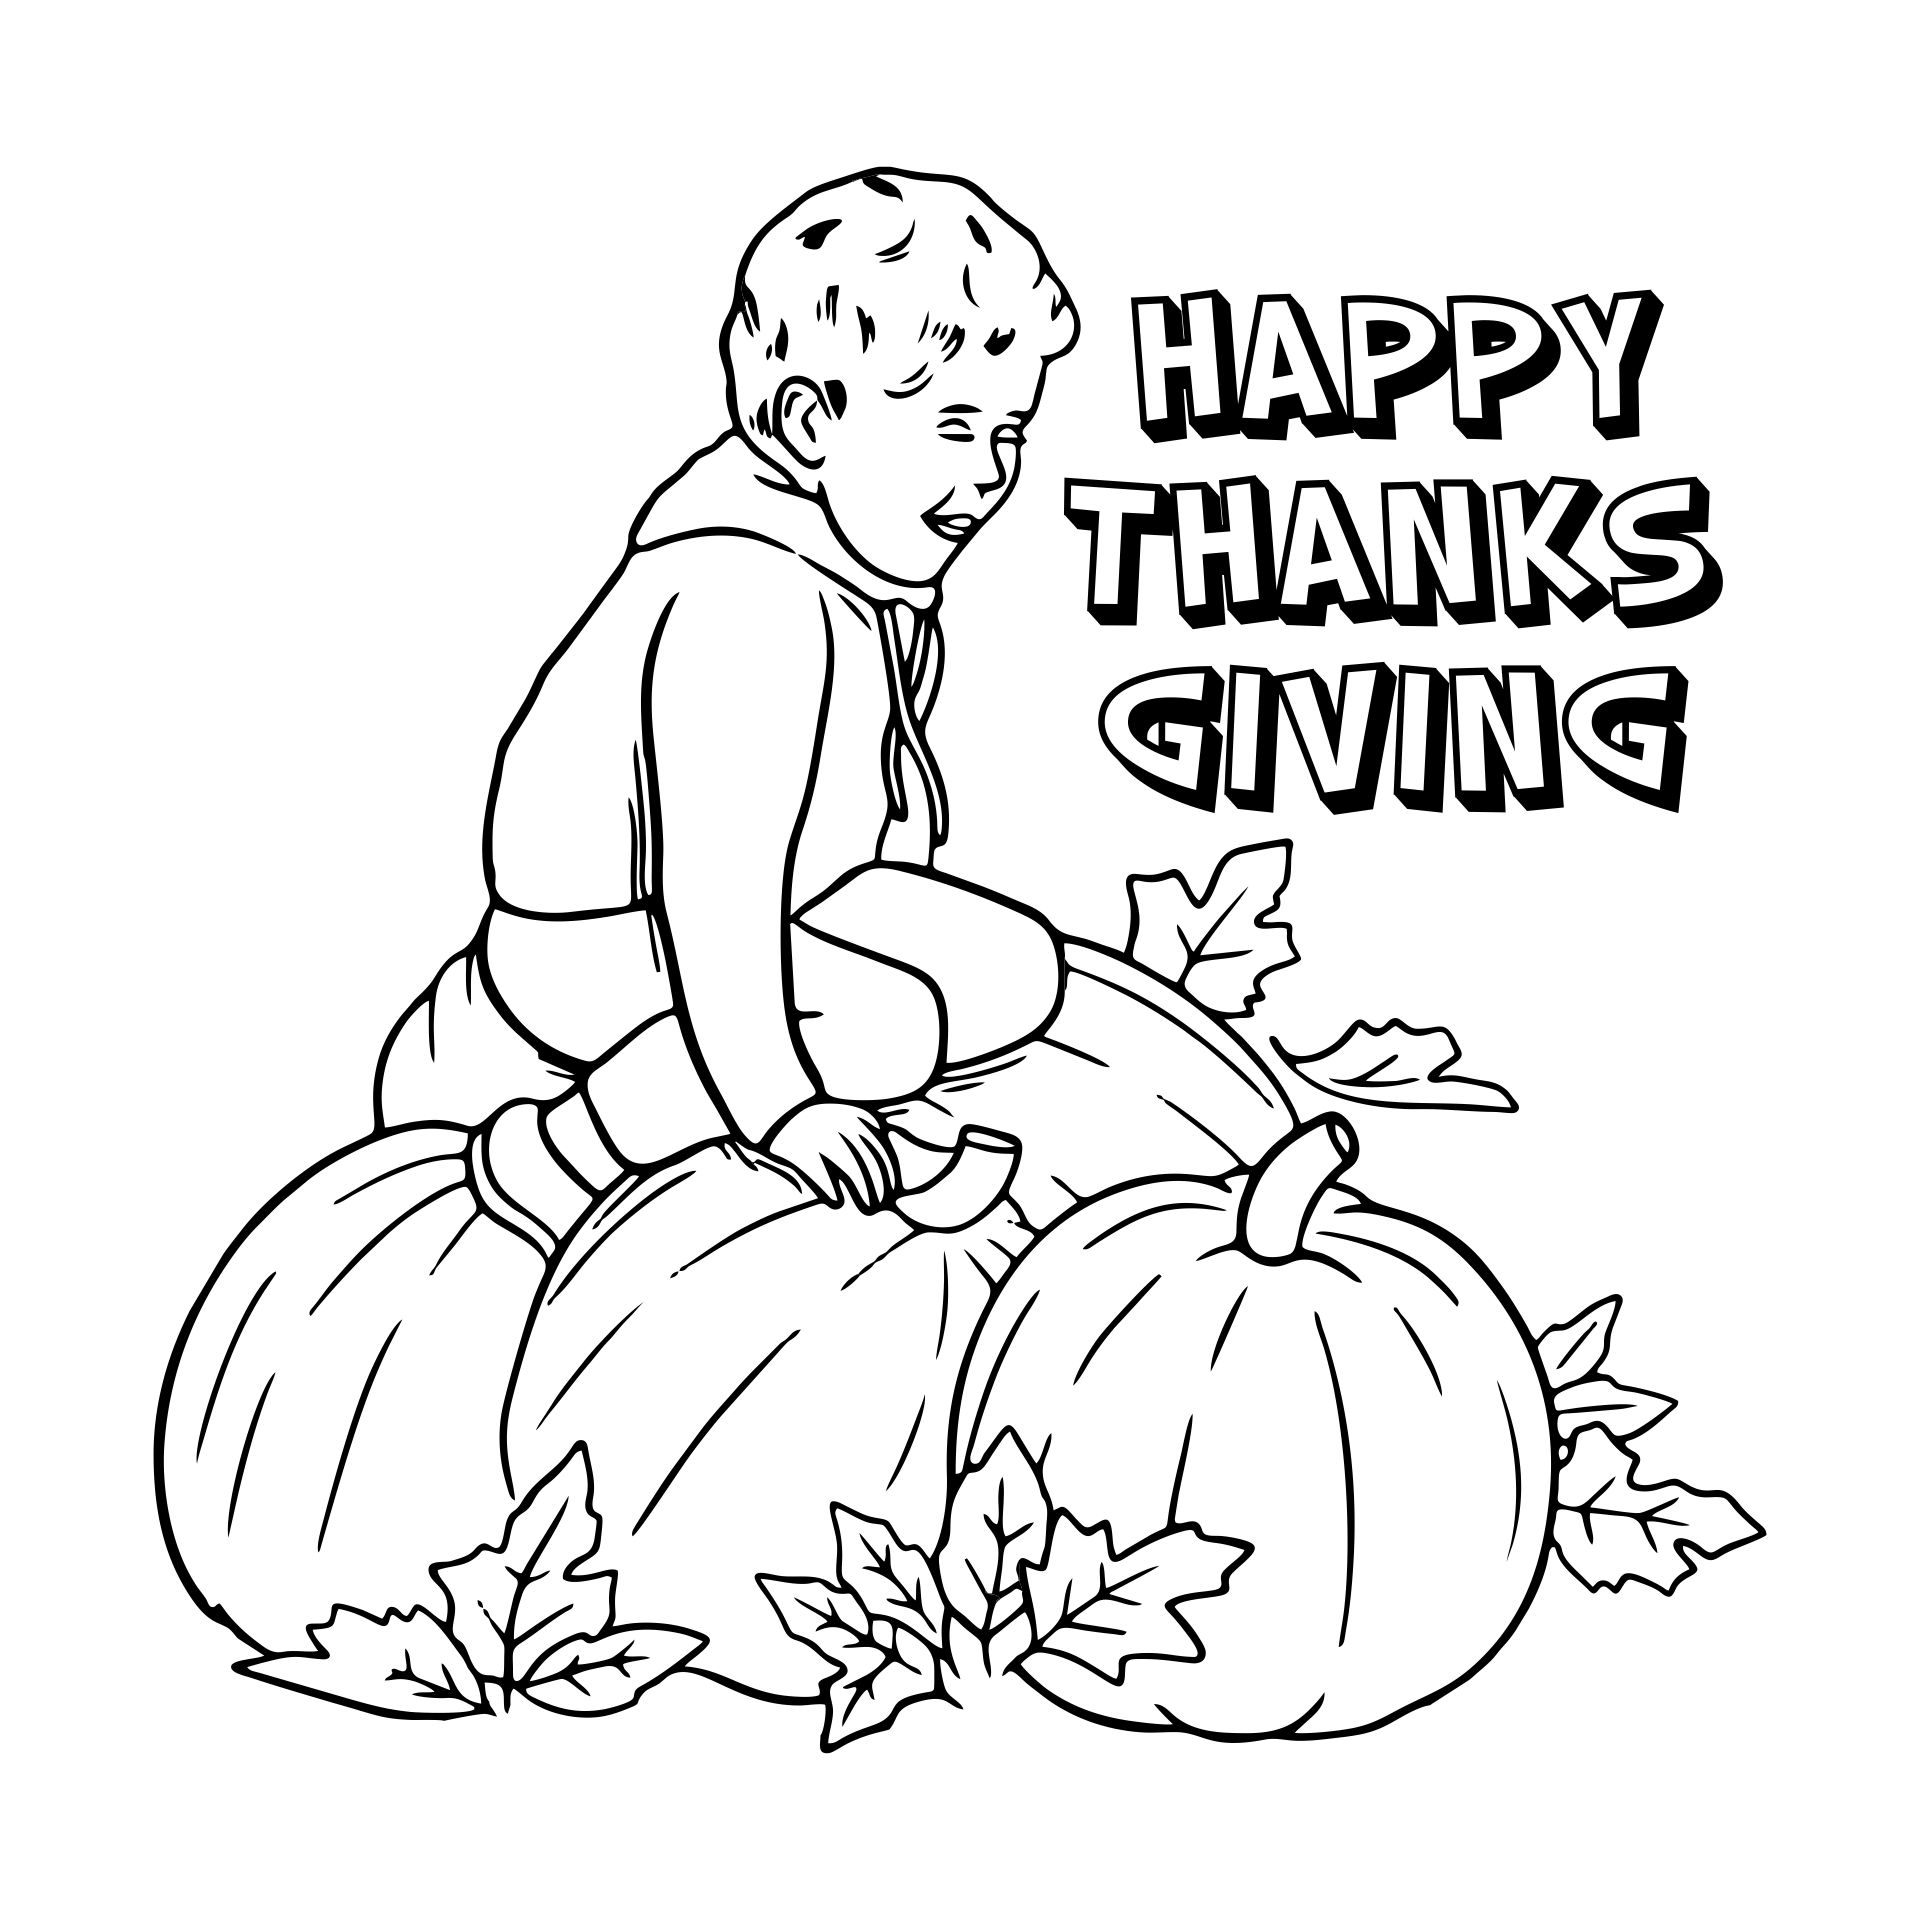 If the Printable Thanksgiving Indian Coloring Pages For Kids & Boys